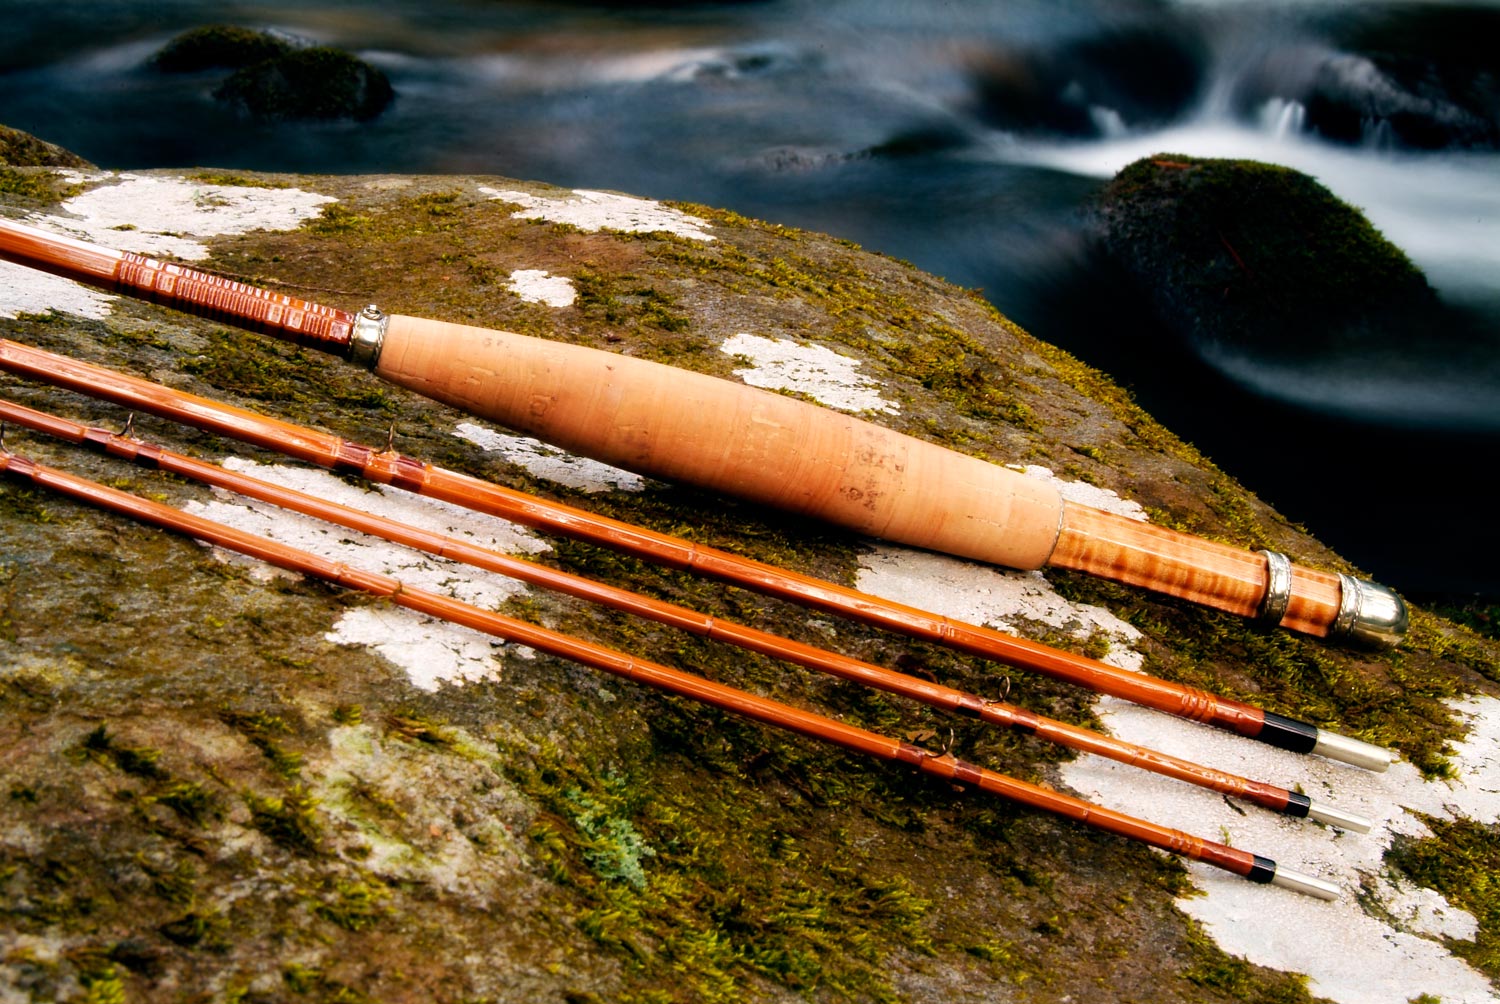 OLD VINTAGE 5 PIECE SUN FLY ROD FISHING POLE BAMBOO? WOOD IN CASE